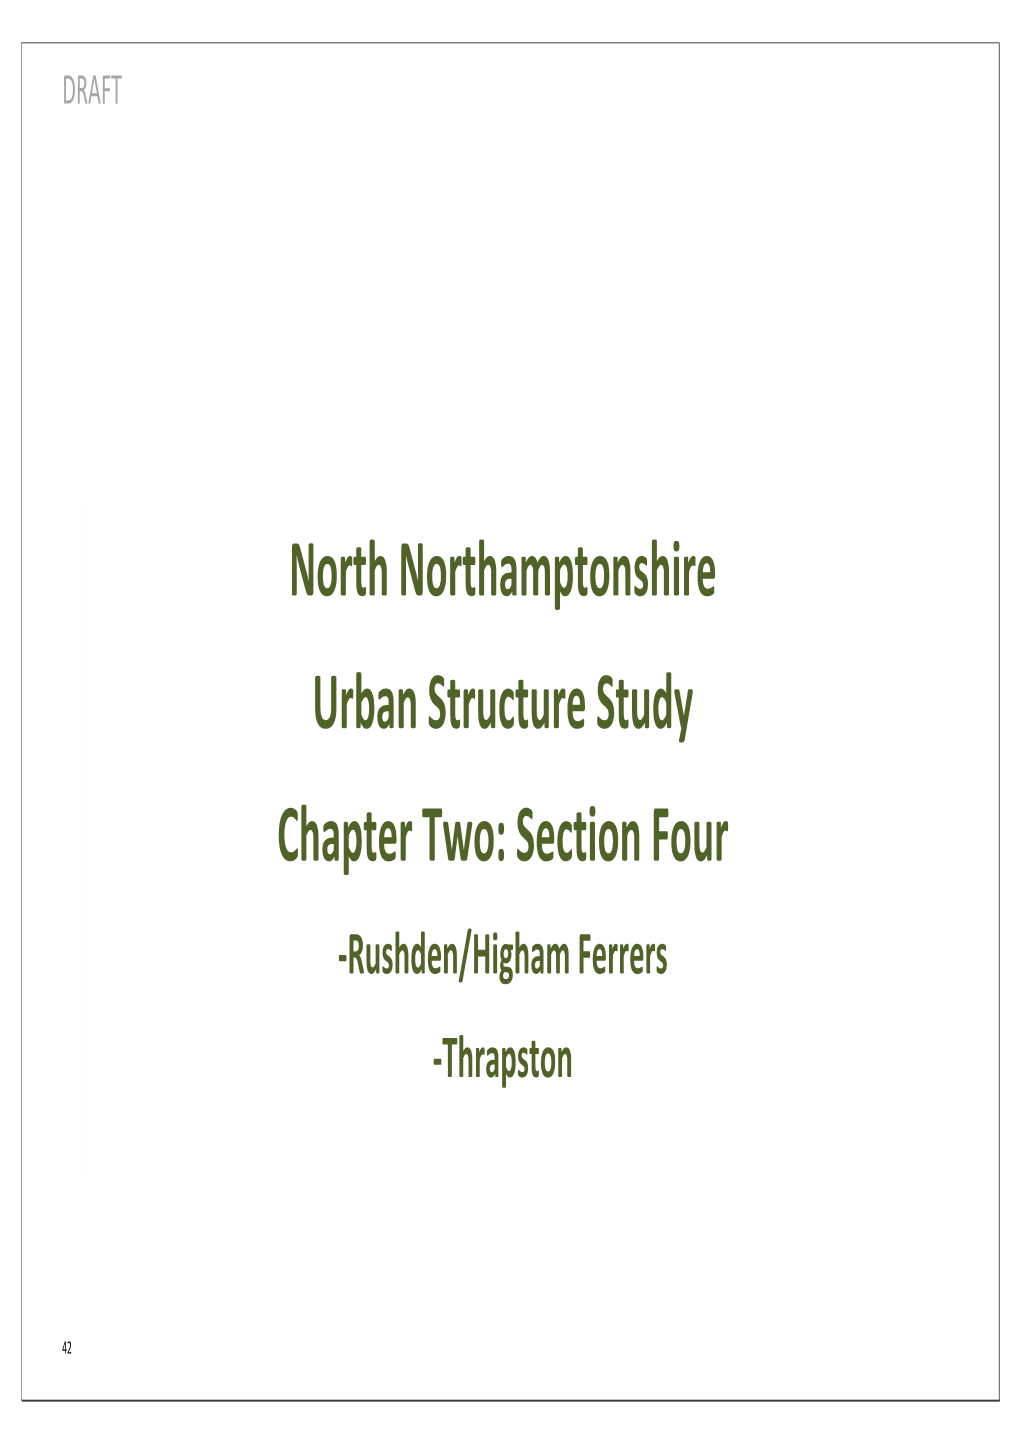 North Northamptonshire Urban Structure Study Chapter Two: Section Four -Rushden/Higham Ferrers -Thrapston